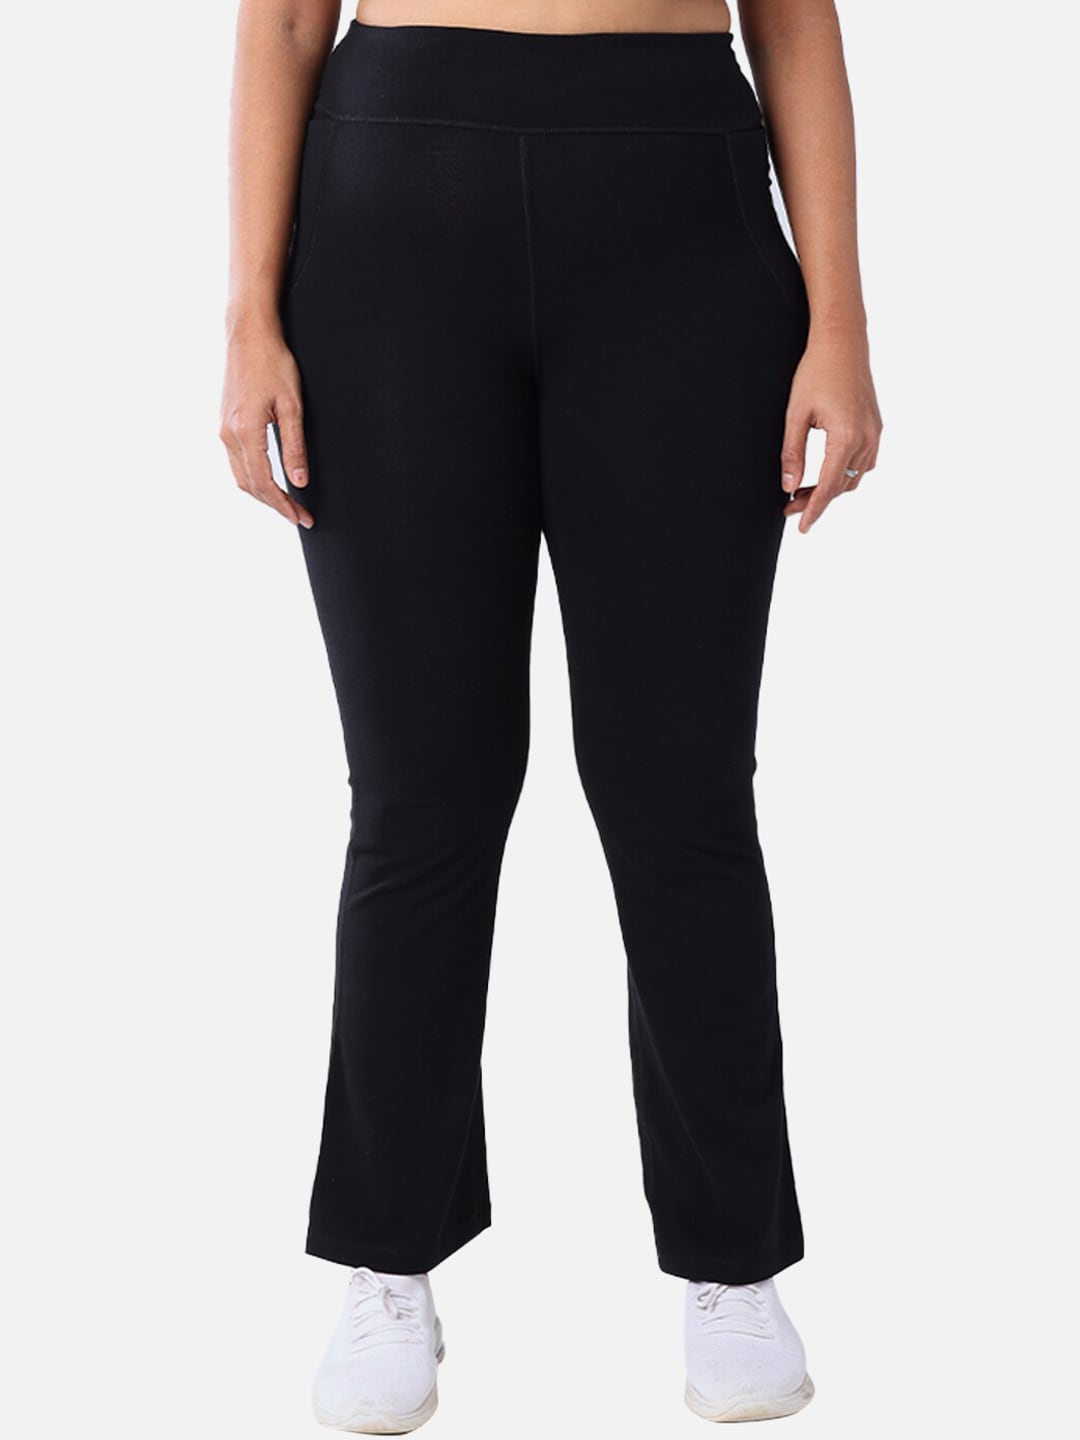 BlissClub Women Black Solid Boot Cut Track Pants Price in India